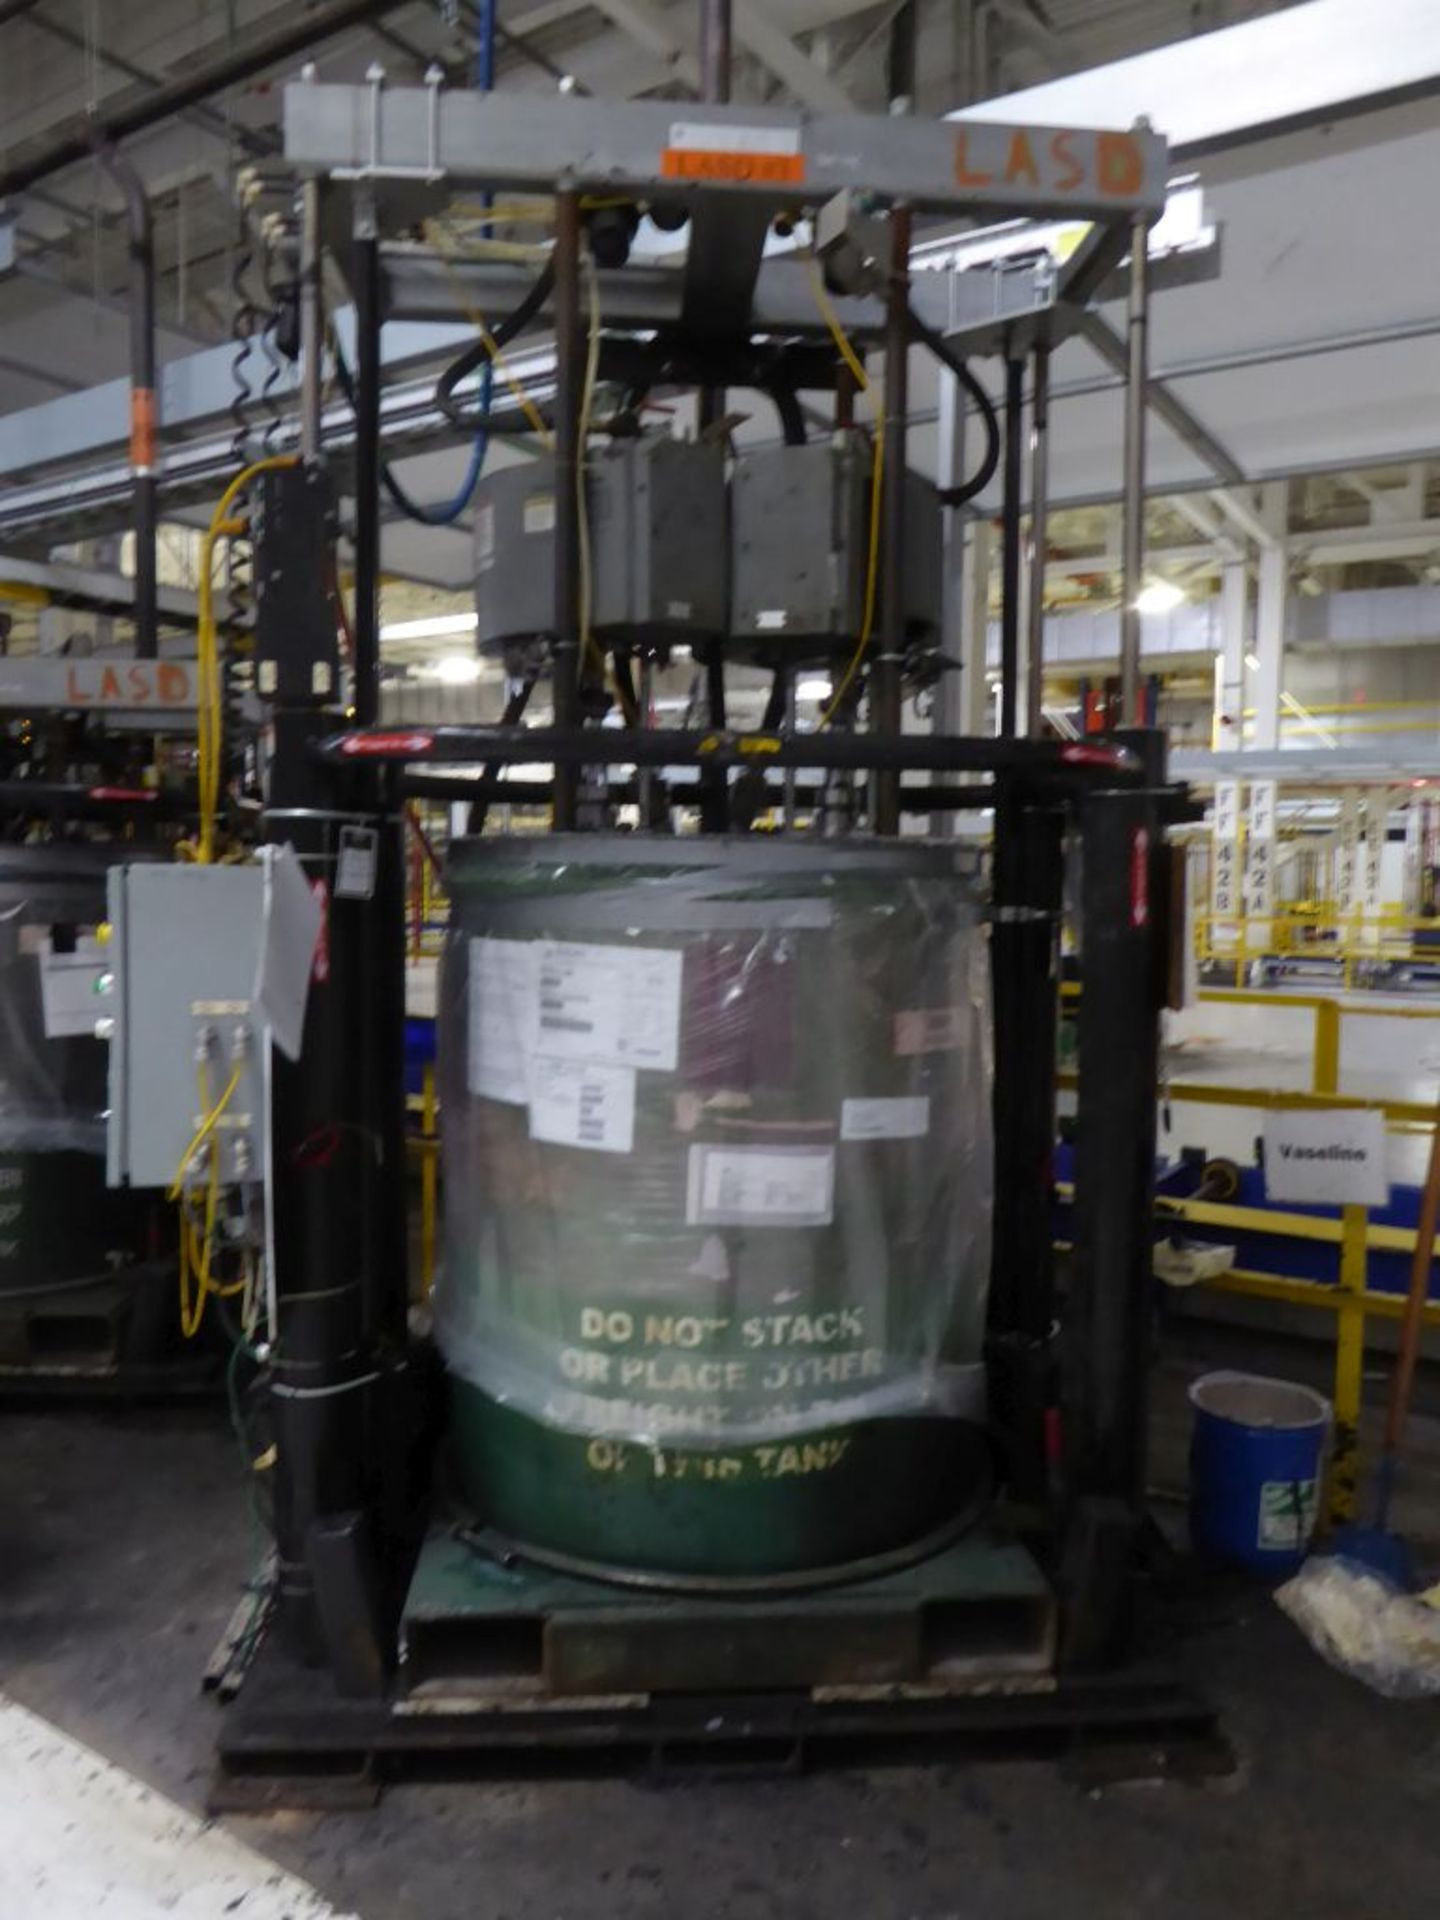 Skid Mounted Graco Premier Air Powered Pump System